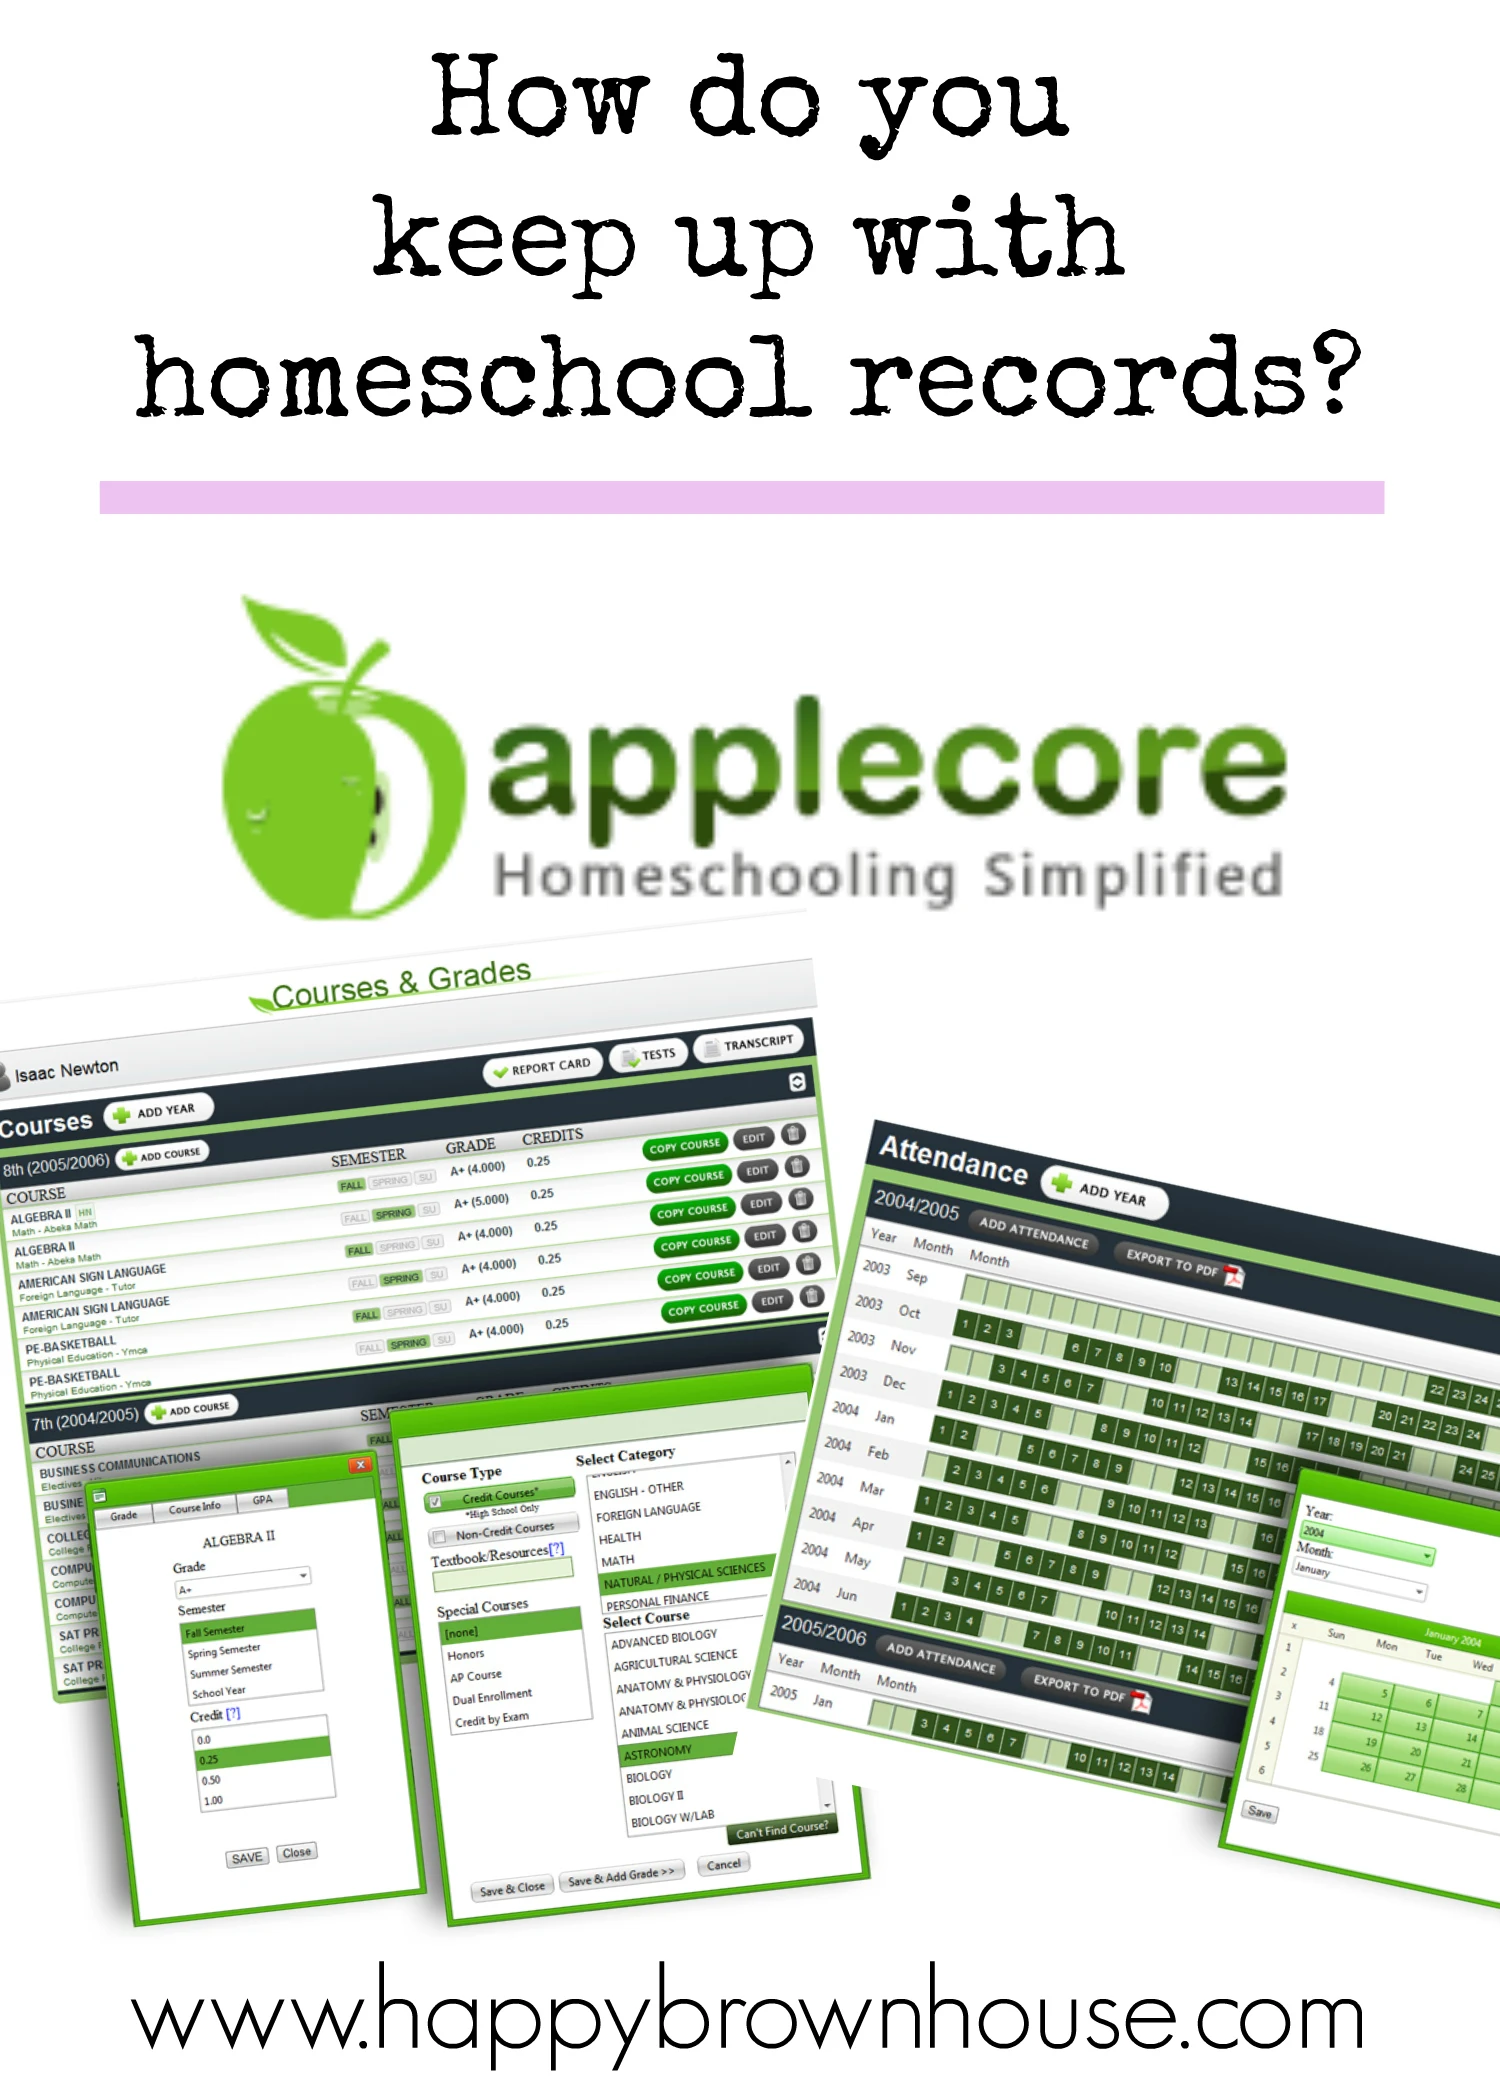 Applecore Homeschool Recordkeeping is an easy way to keep up with grades, portfolios, and attendance!